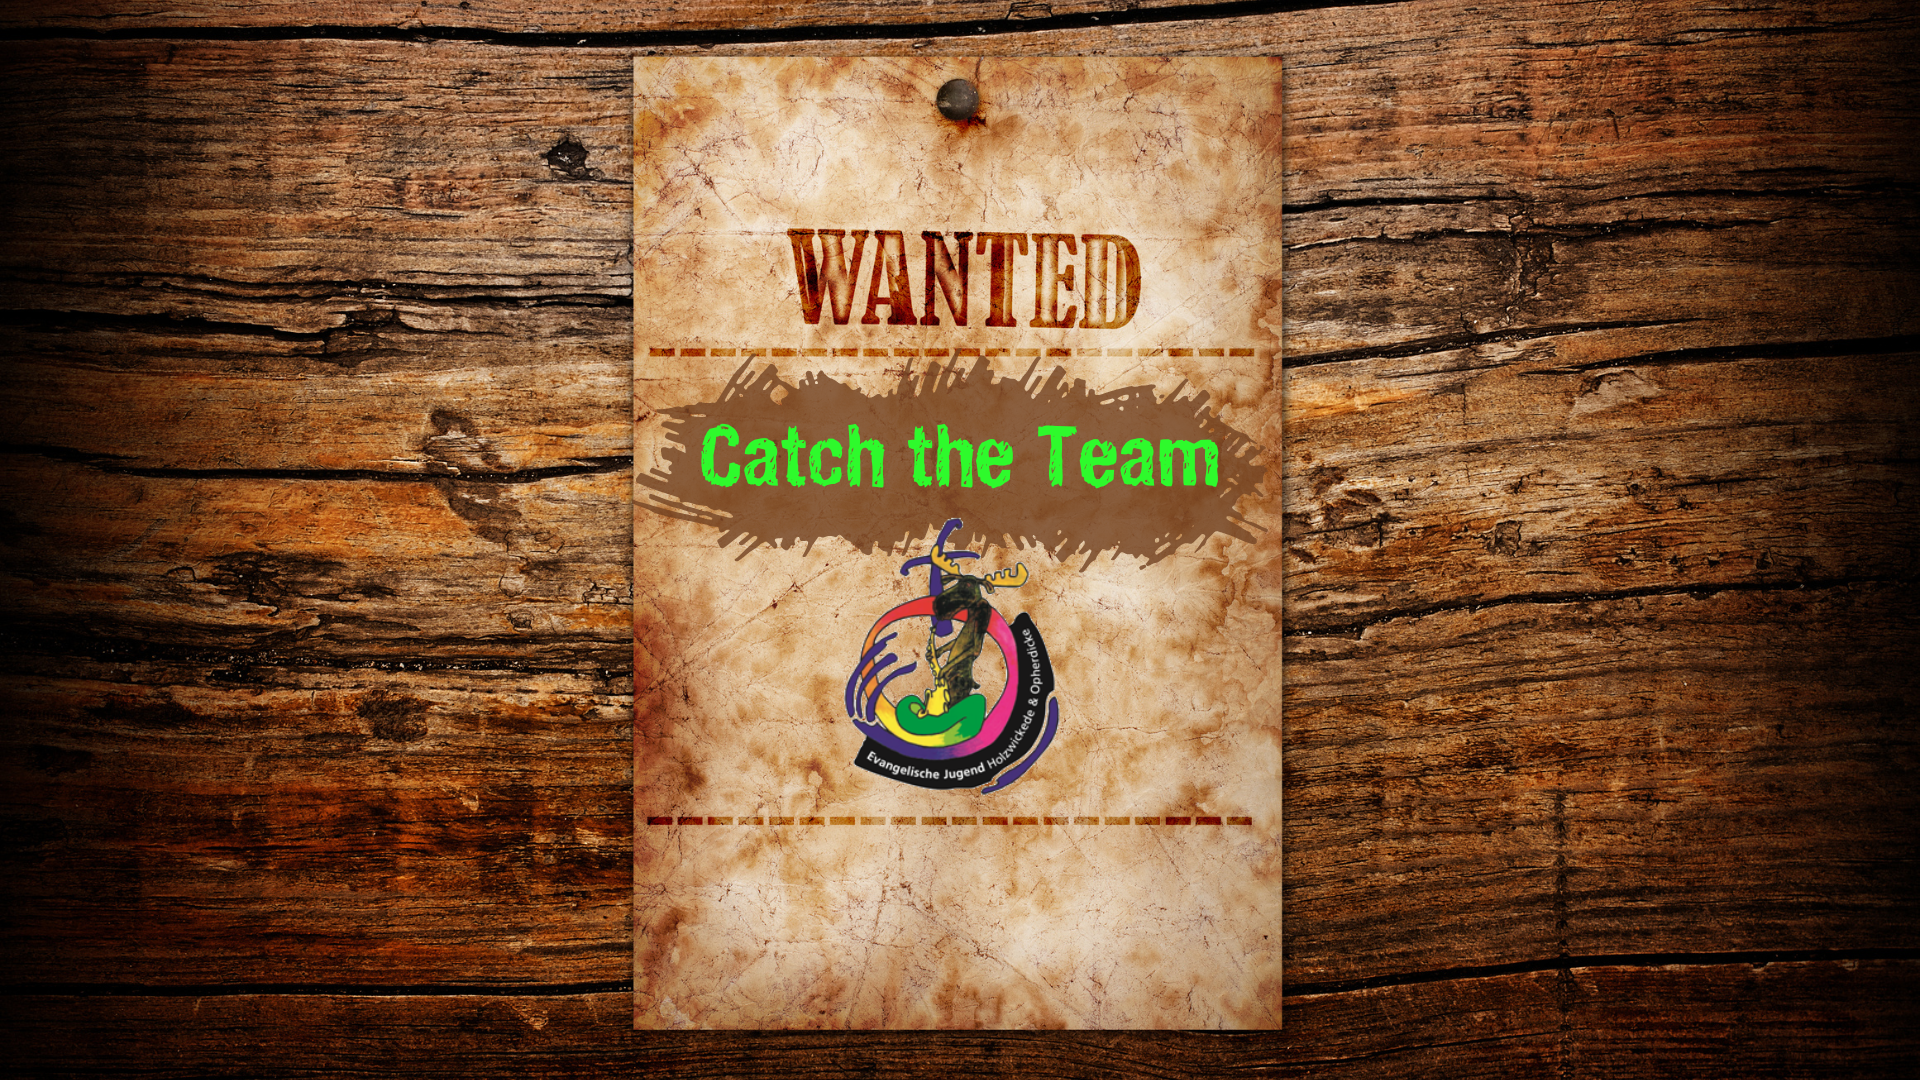 Wanted! - Catch the Team